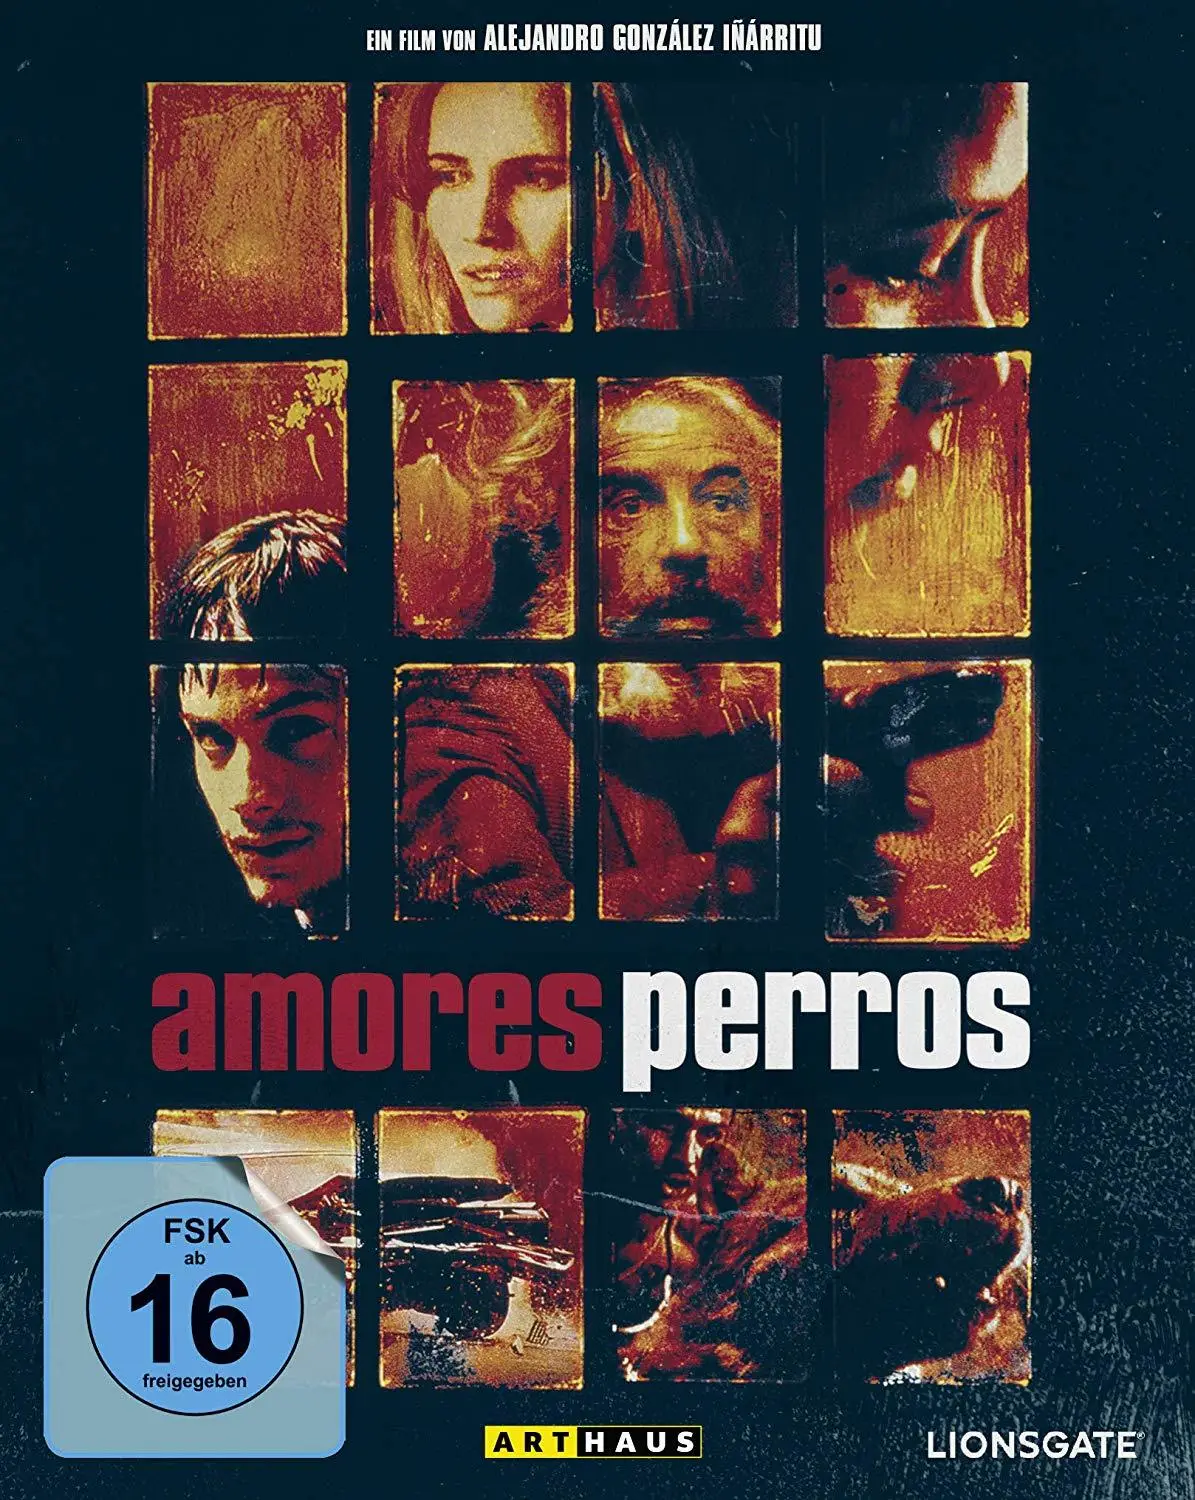 amores perros 720p yify download